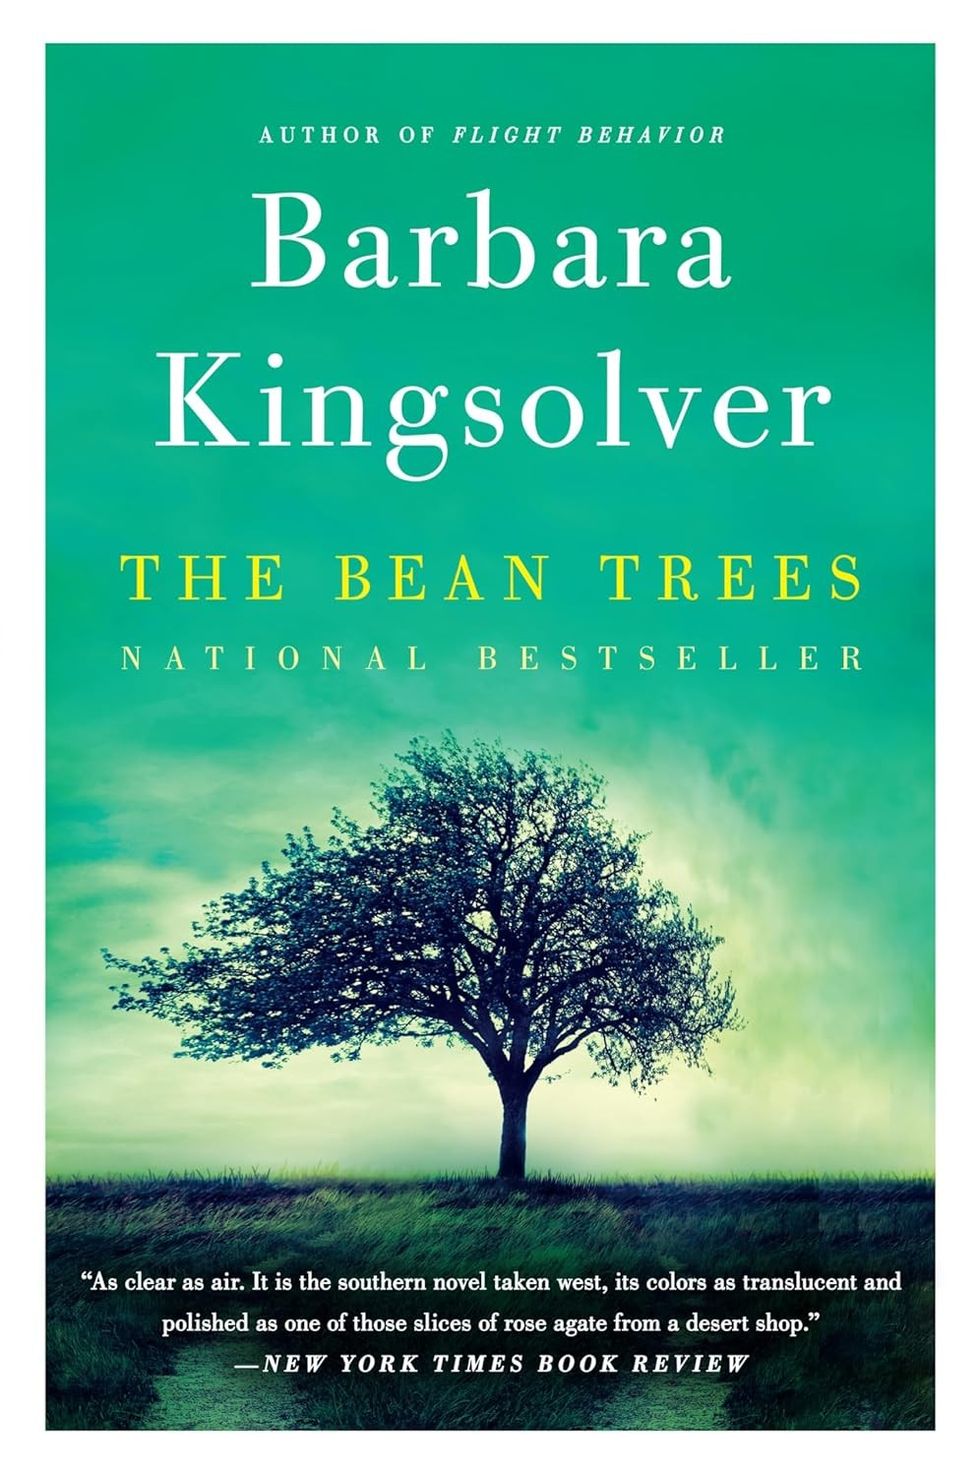 "The Bean Trees" by Barbara Kingsolver